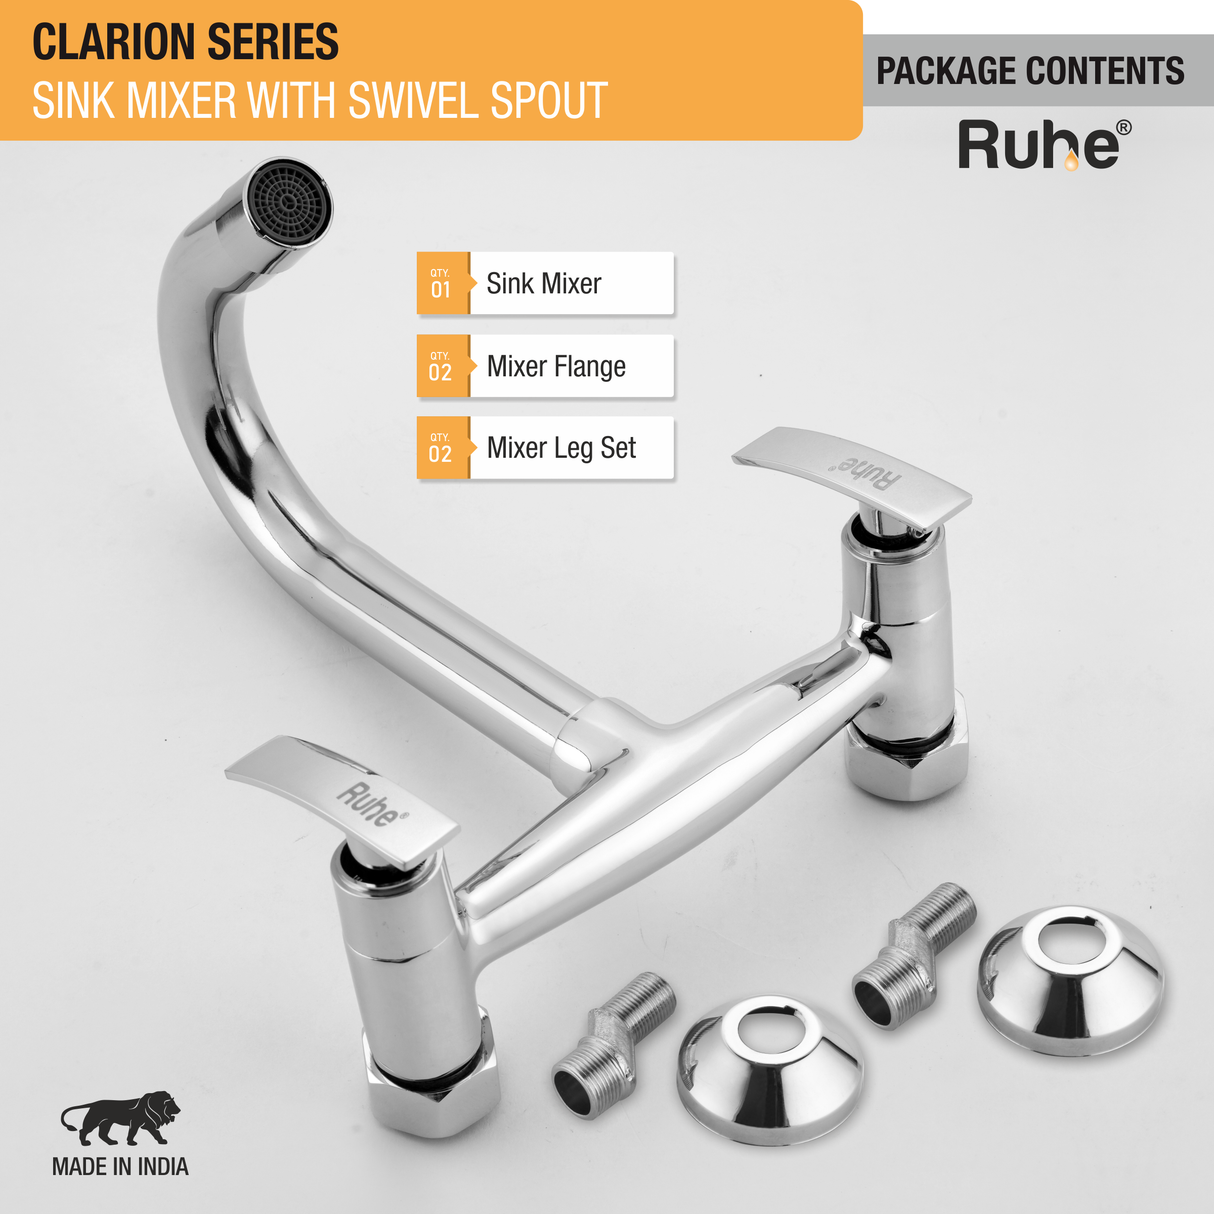 Clarion Sink Mixer With Swivel Spout Faucet package content